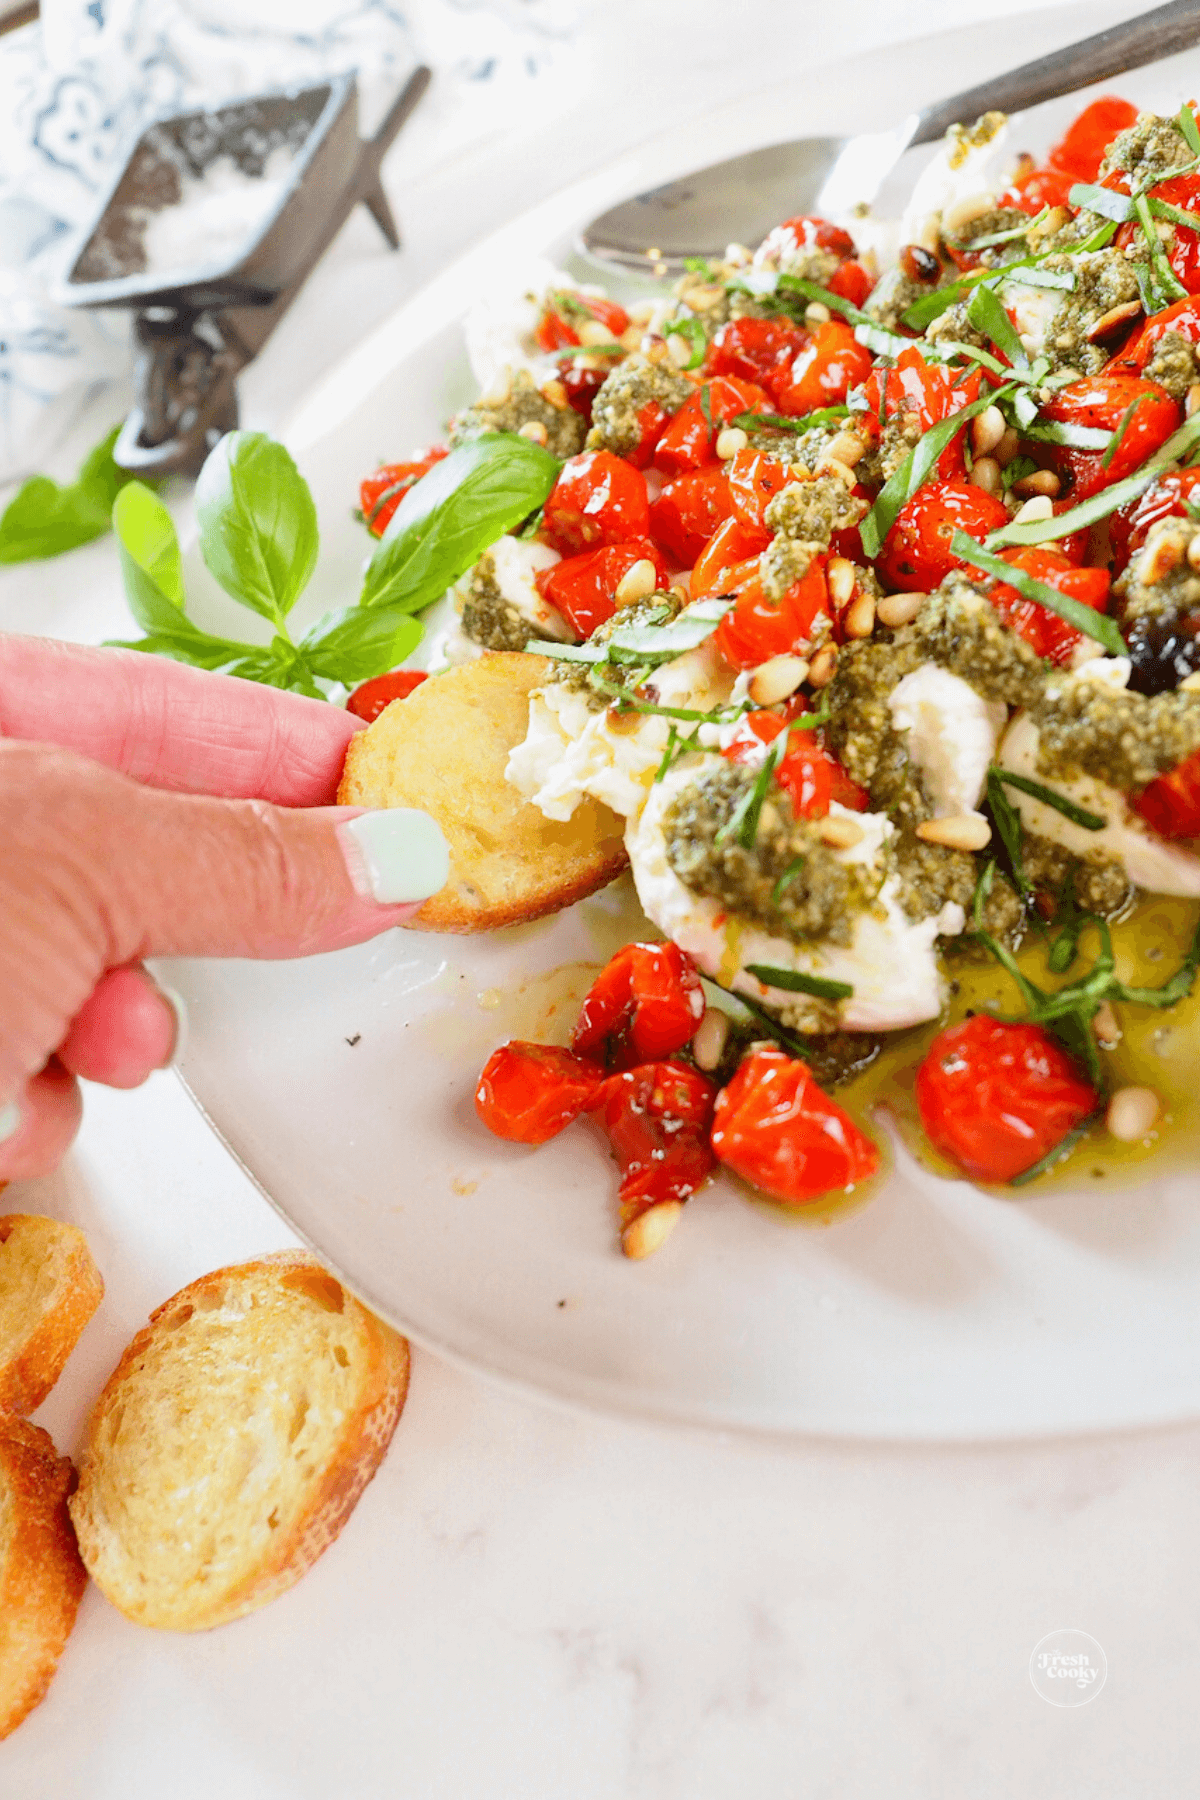 Hand using crostini to grab some of the pesto appetizer. 